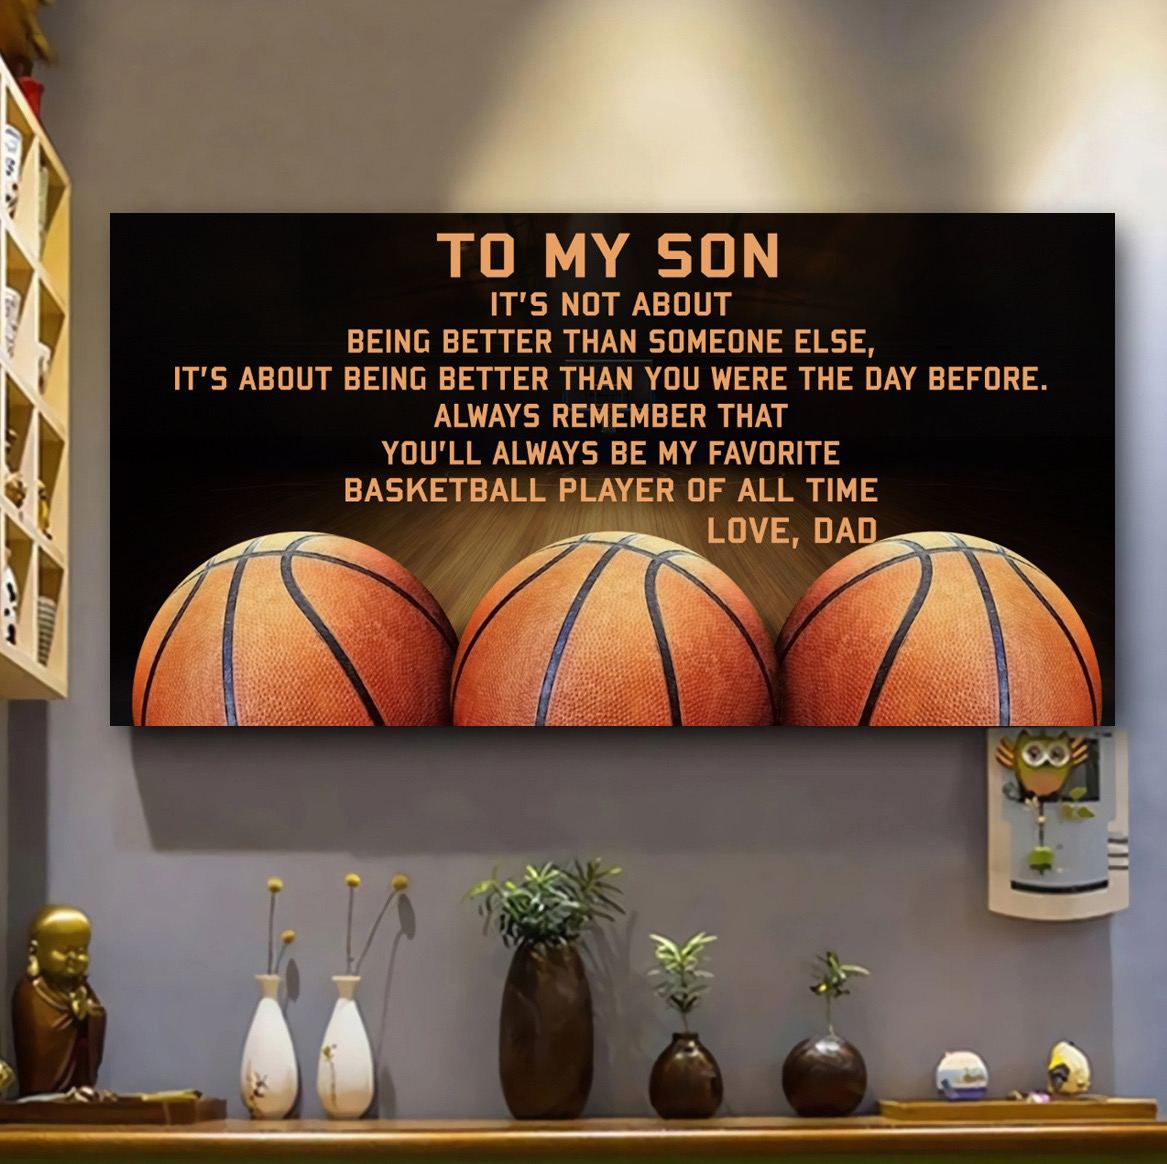 Customizable basketball poster canvas, gifts from dad mom to son- It is not about better than someone else, It is about being better than you were the day before, You will always be my favorite basketball player of all time